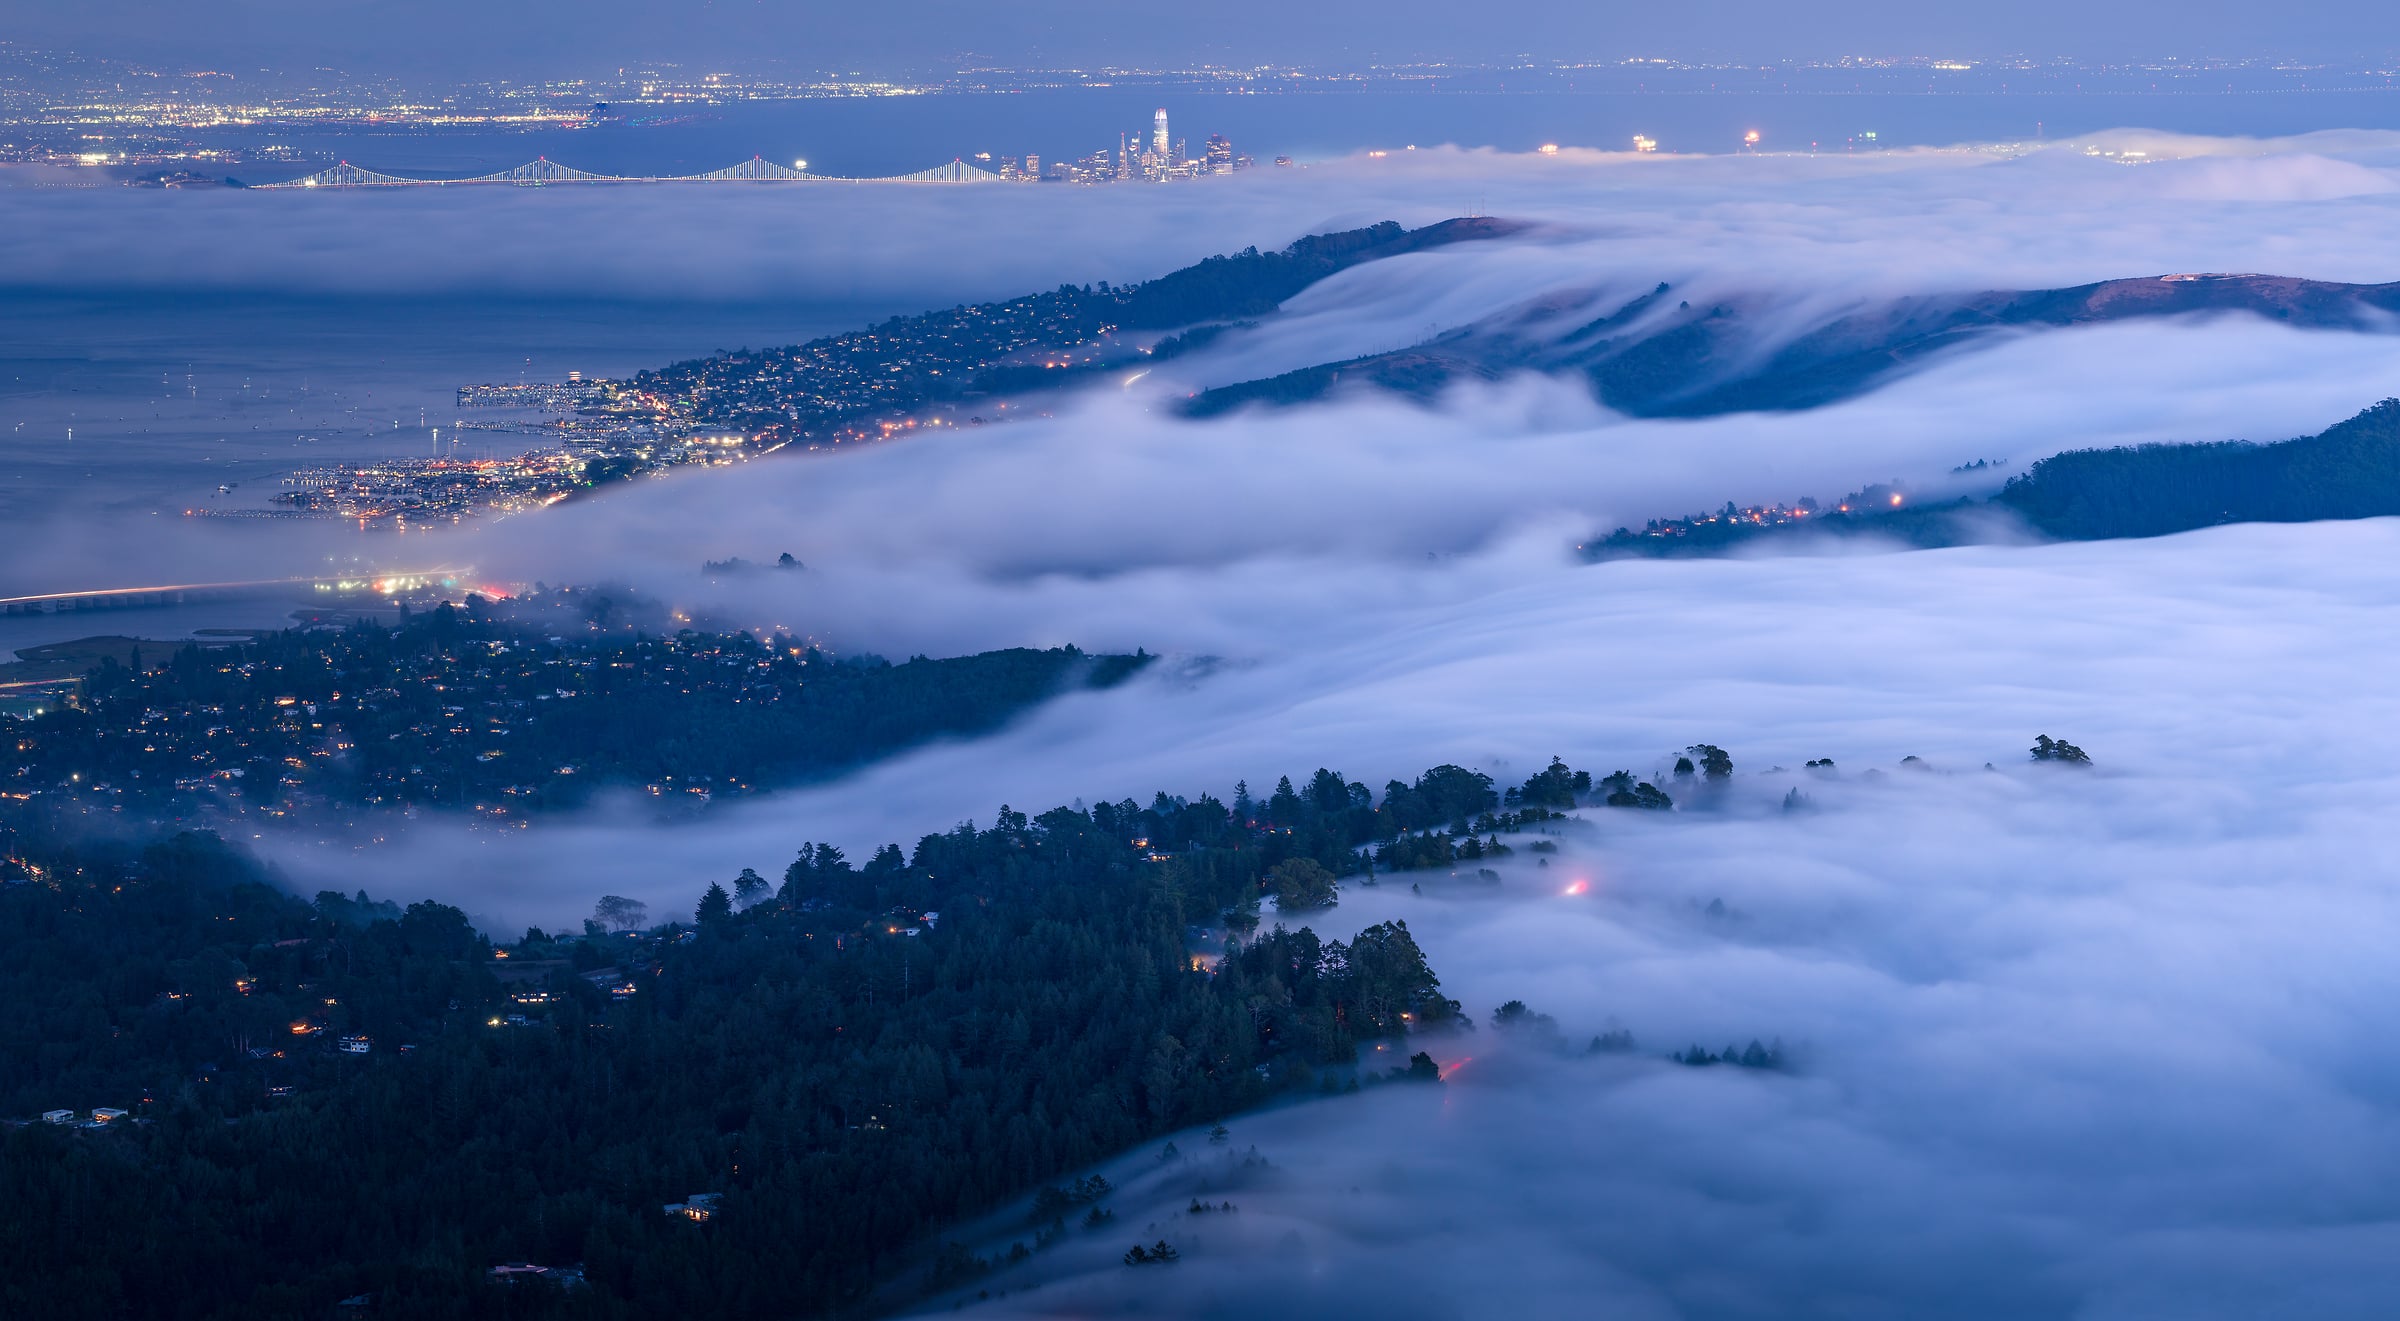 158 megapixels! A very high resolution, large-format VAST photo print of fog rolling over hills and a city at night; landscape photograph created by Jeff Lewis from Mt. Tamalpais in Marin County, California.